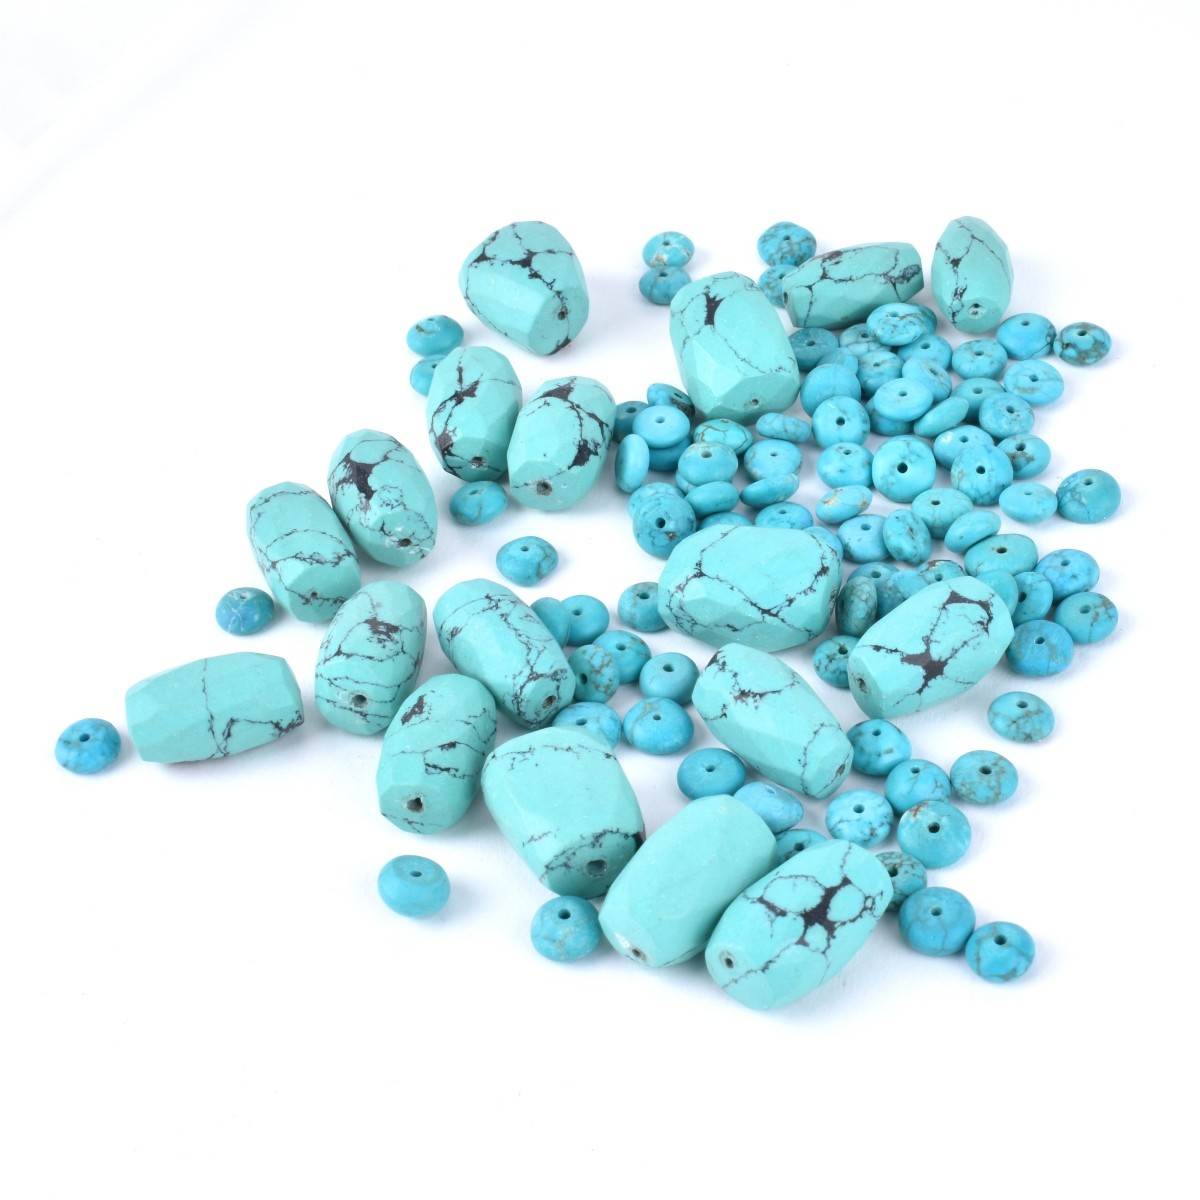 Collection of Turquoise Beads